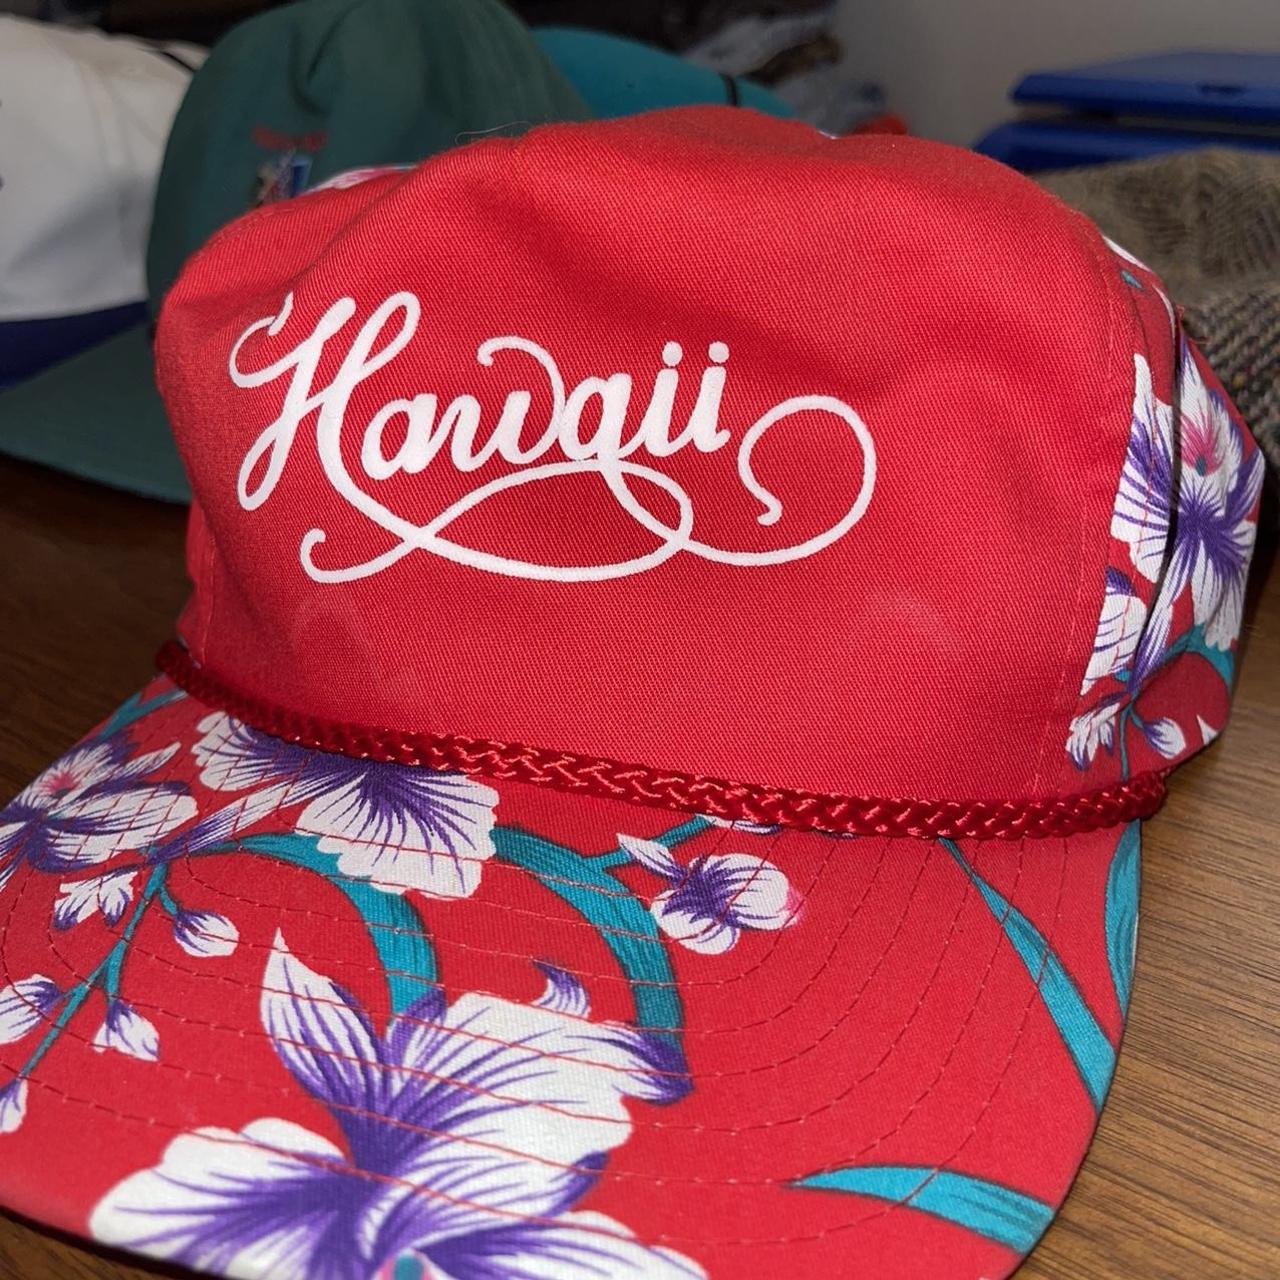 Product Image 3 - 1980s Hawaii Trucker Hat VINTAGE

Size/fitting: